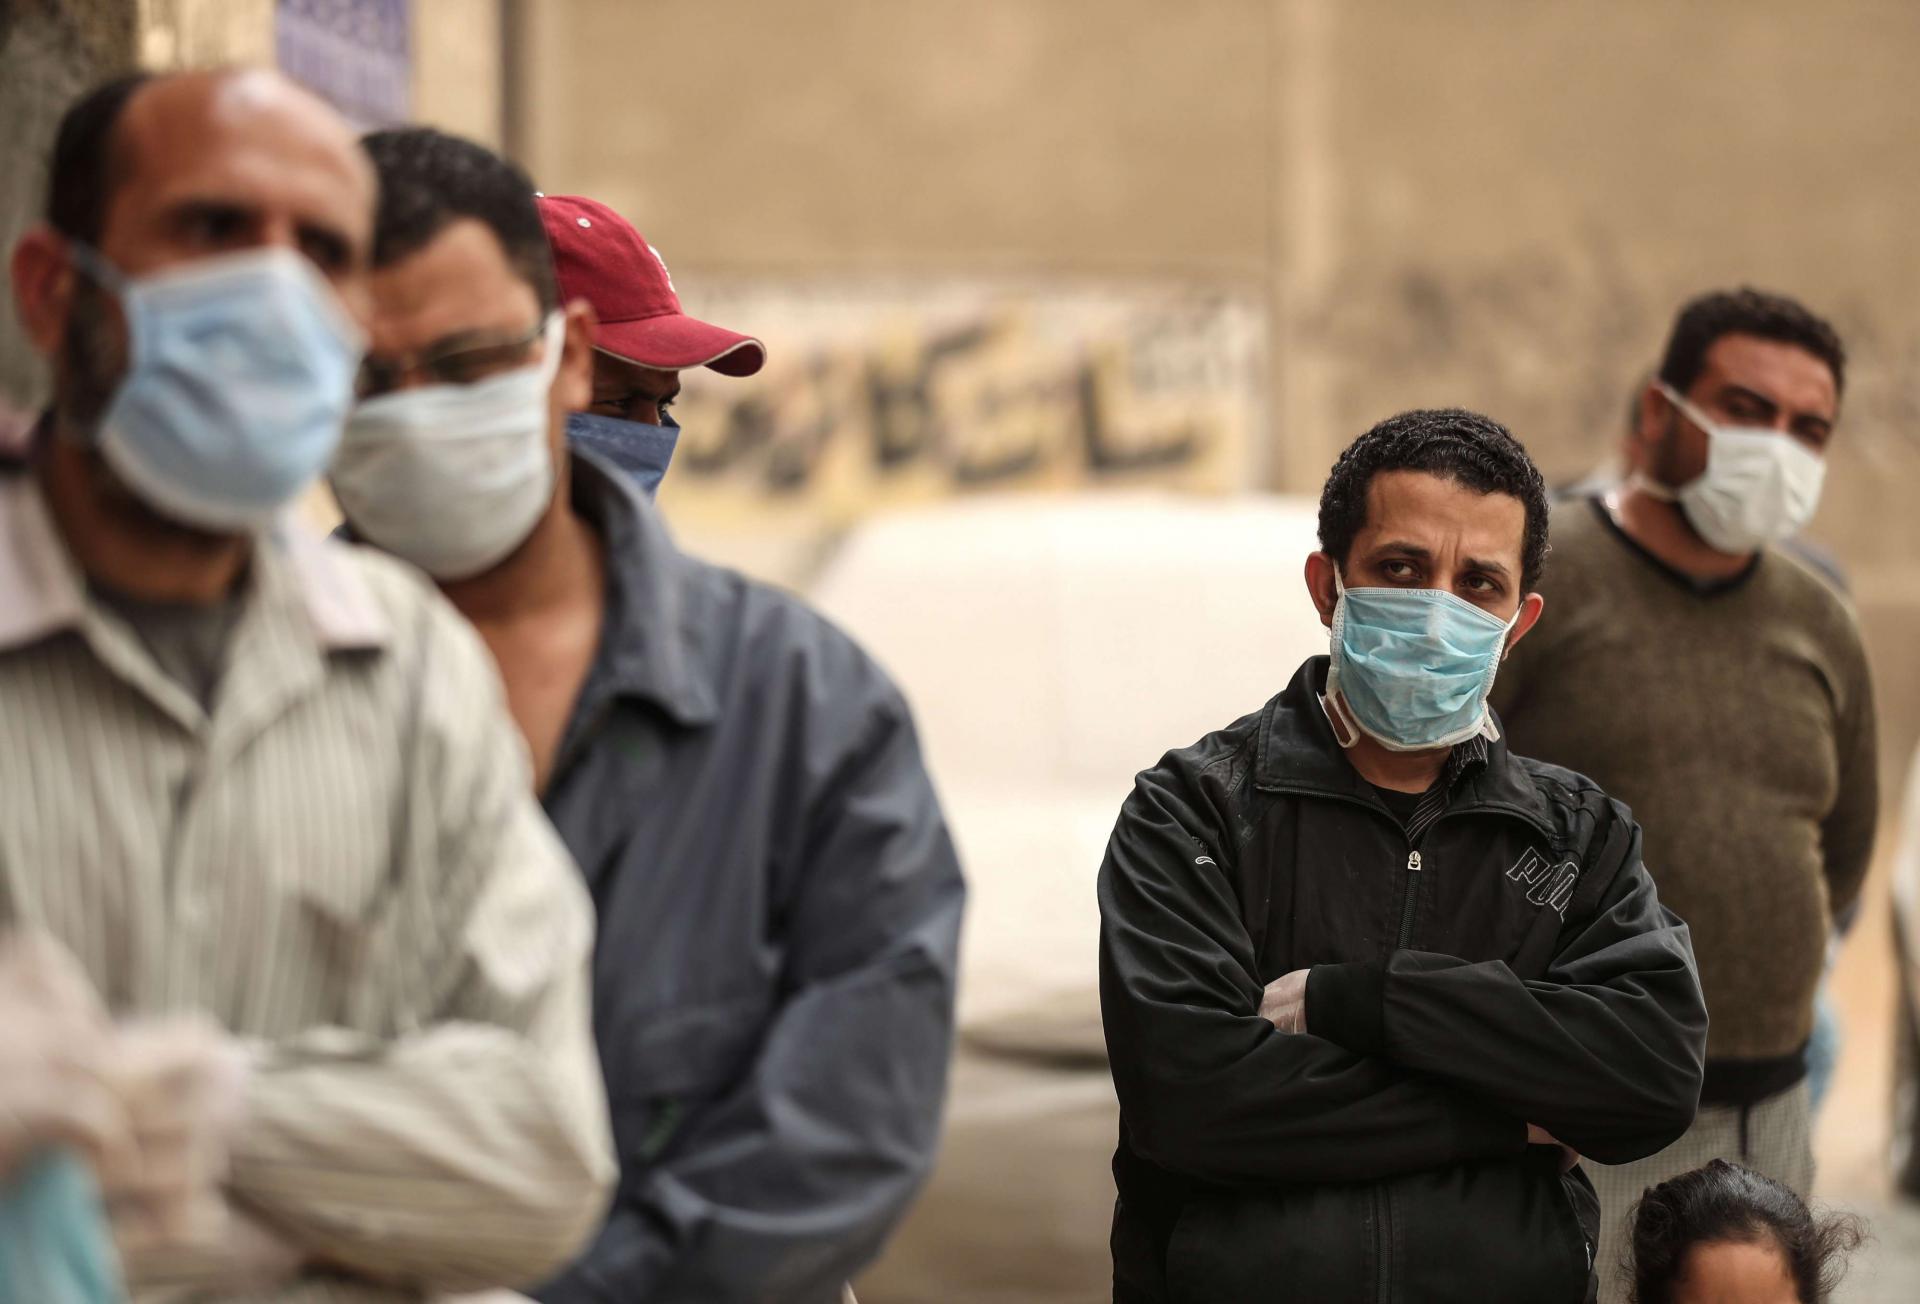 Egypt's official unemployment rate is around 10 percent, and more than five million people work as day labourers in the informal economy